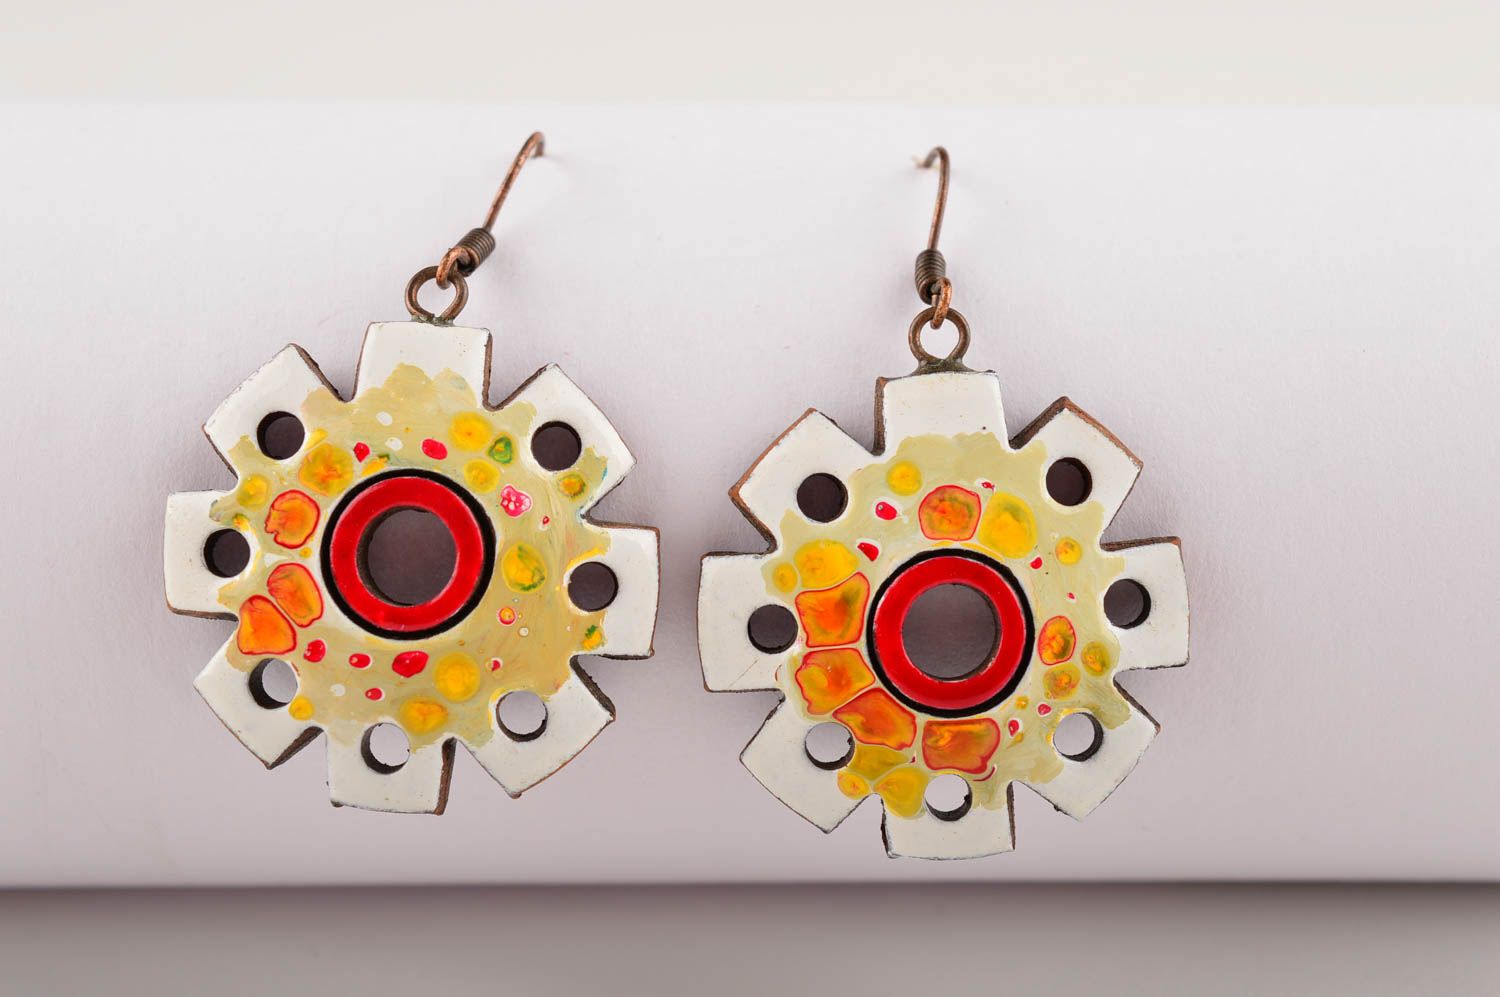 Handmade ceramic earrings designer accessories fashion earrings gifts for her photo 4